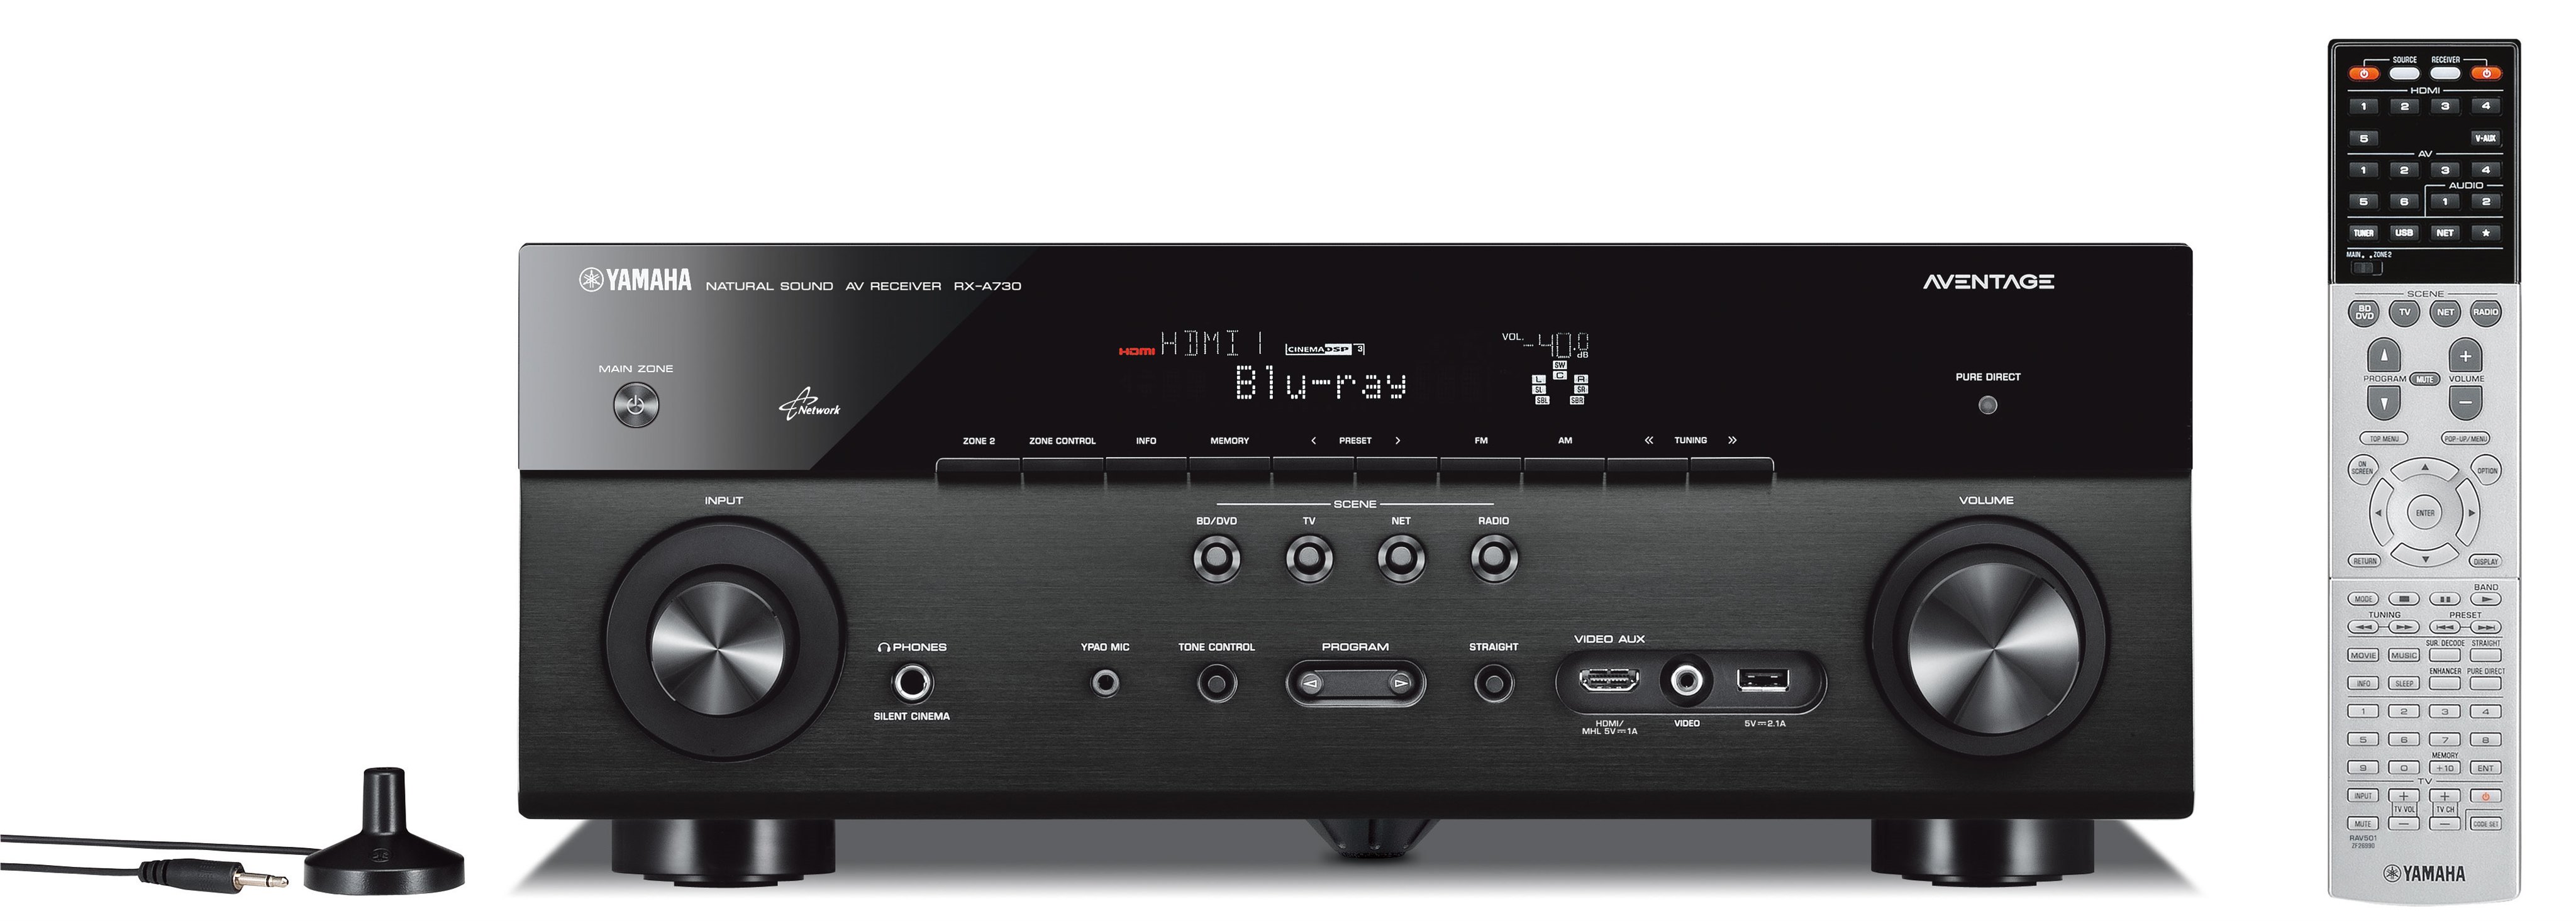 RX-A730 - Overview - AV Receivers - Audio & Visual - Products - Yamaha